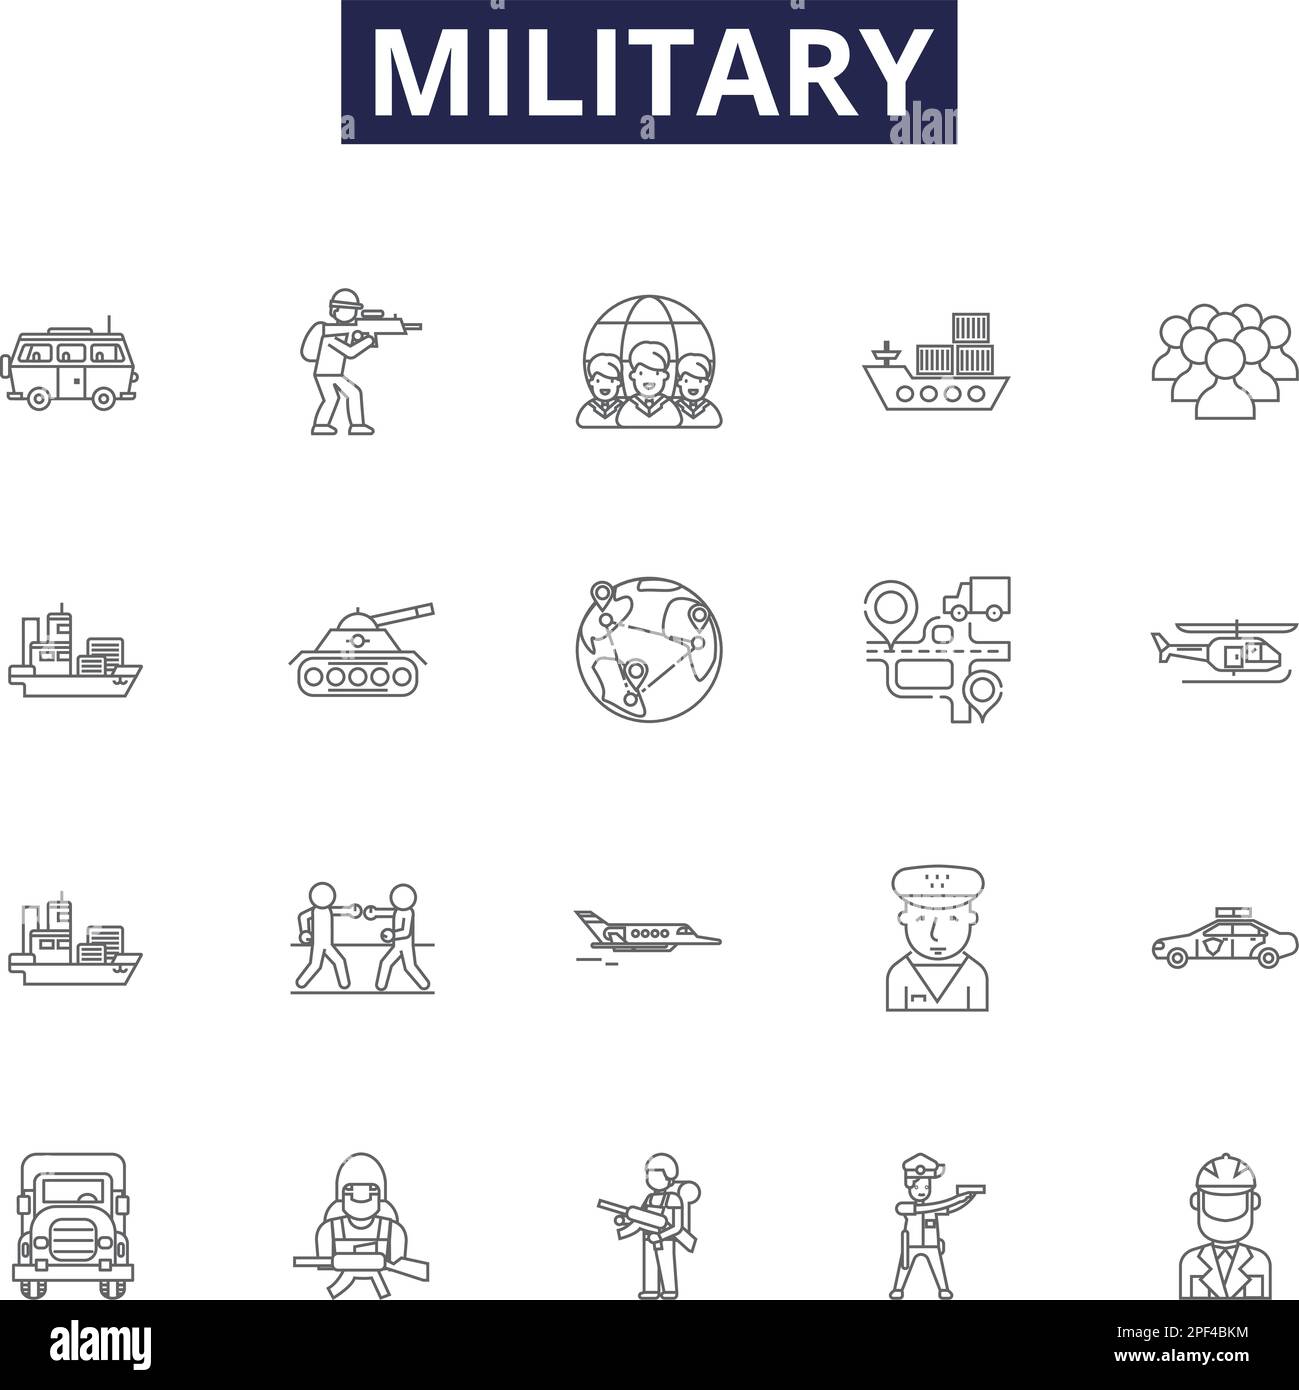 Military line vector icons and signs. navy, marines, airforce, air-defense, warfare, infantry, weapon, combat outline vector illustration set Stock Vector